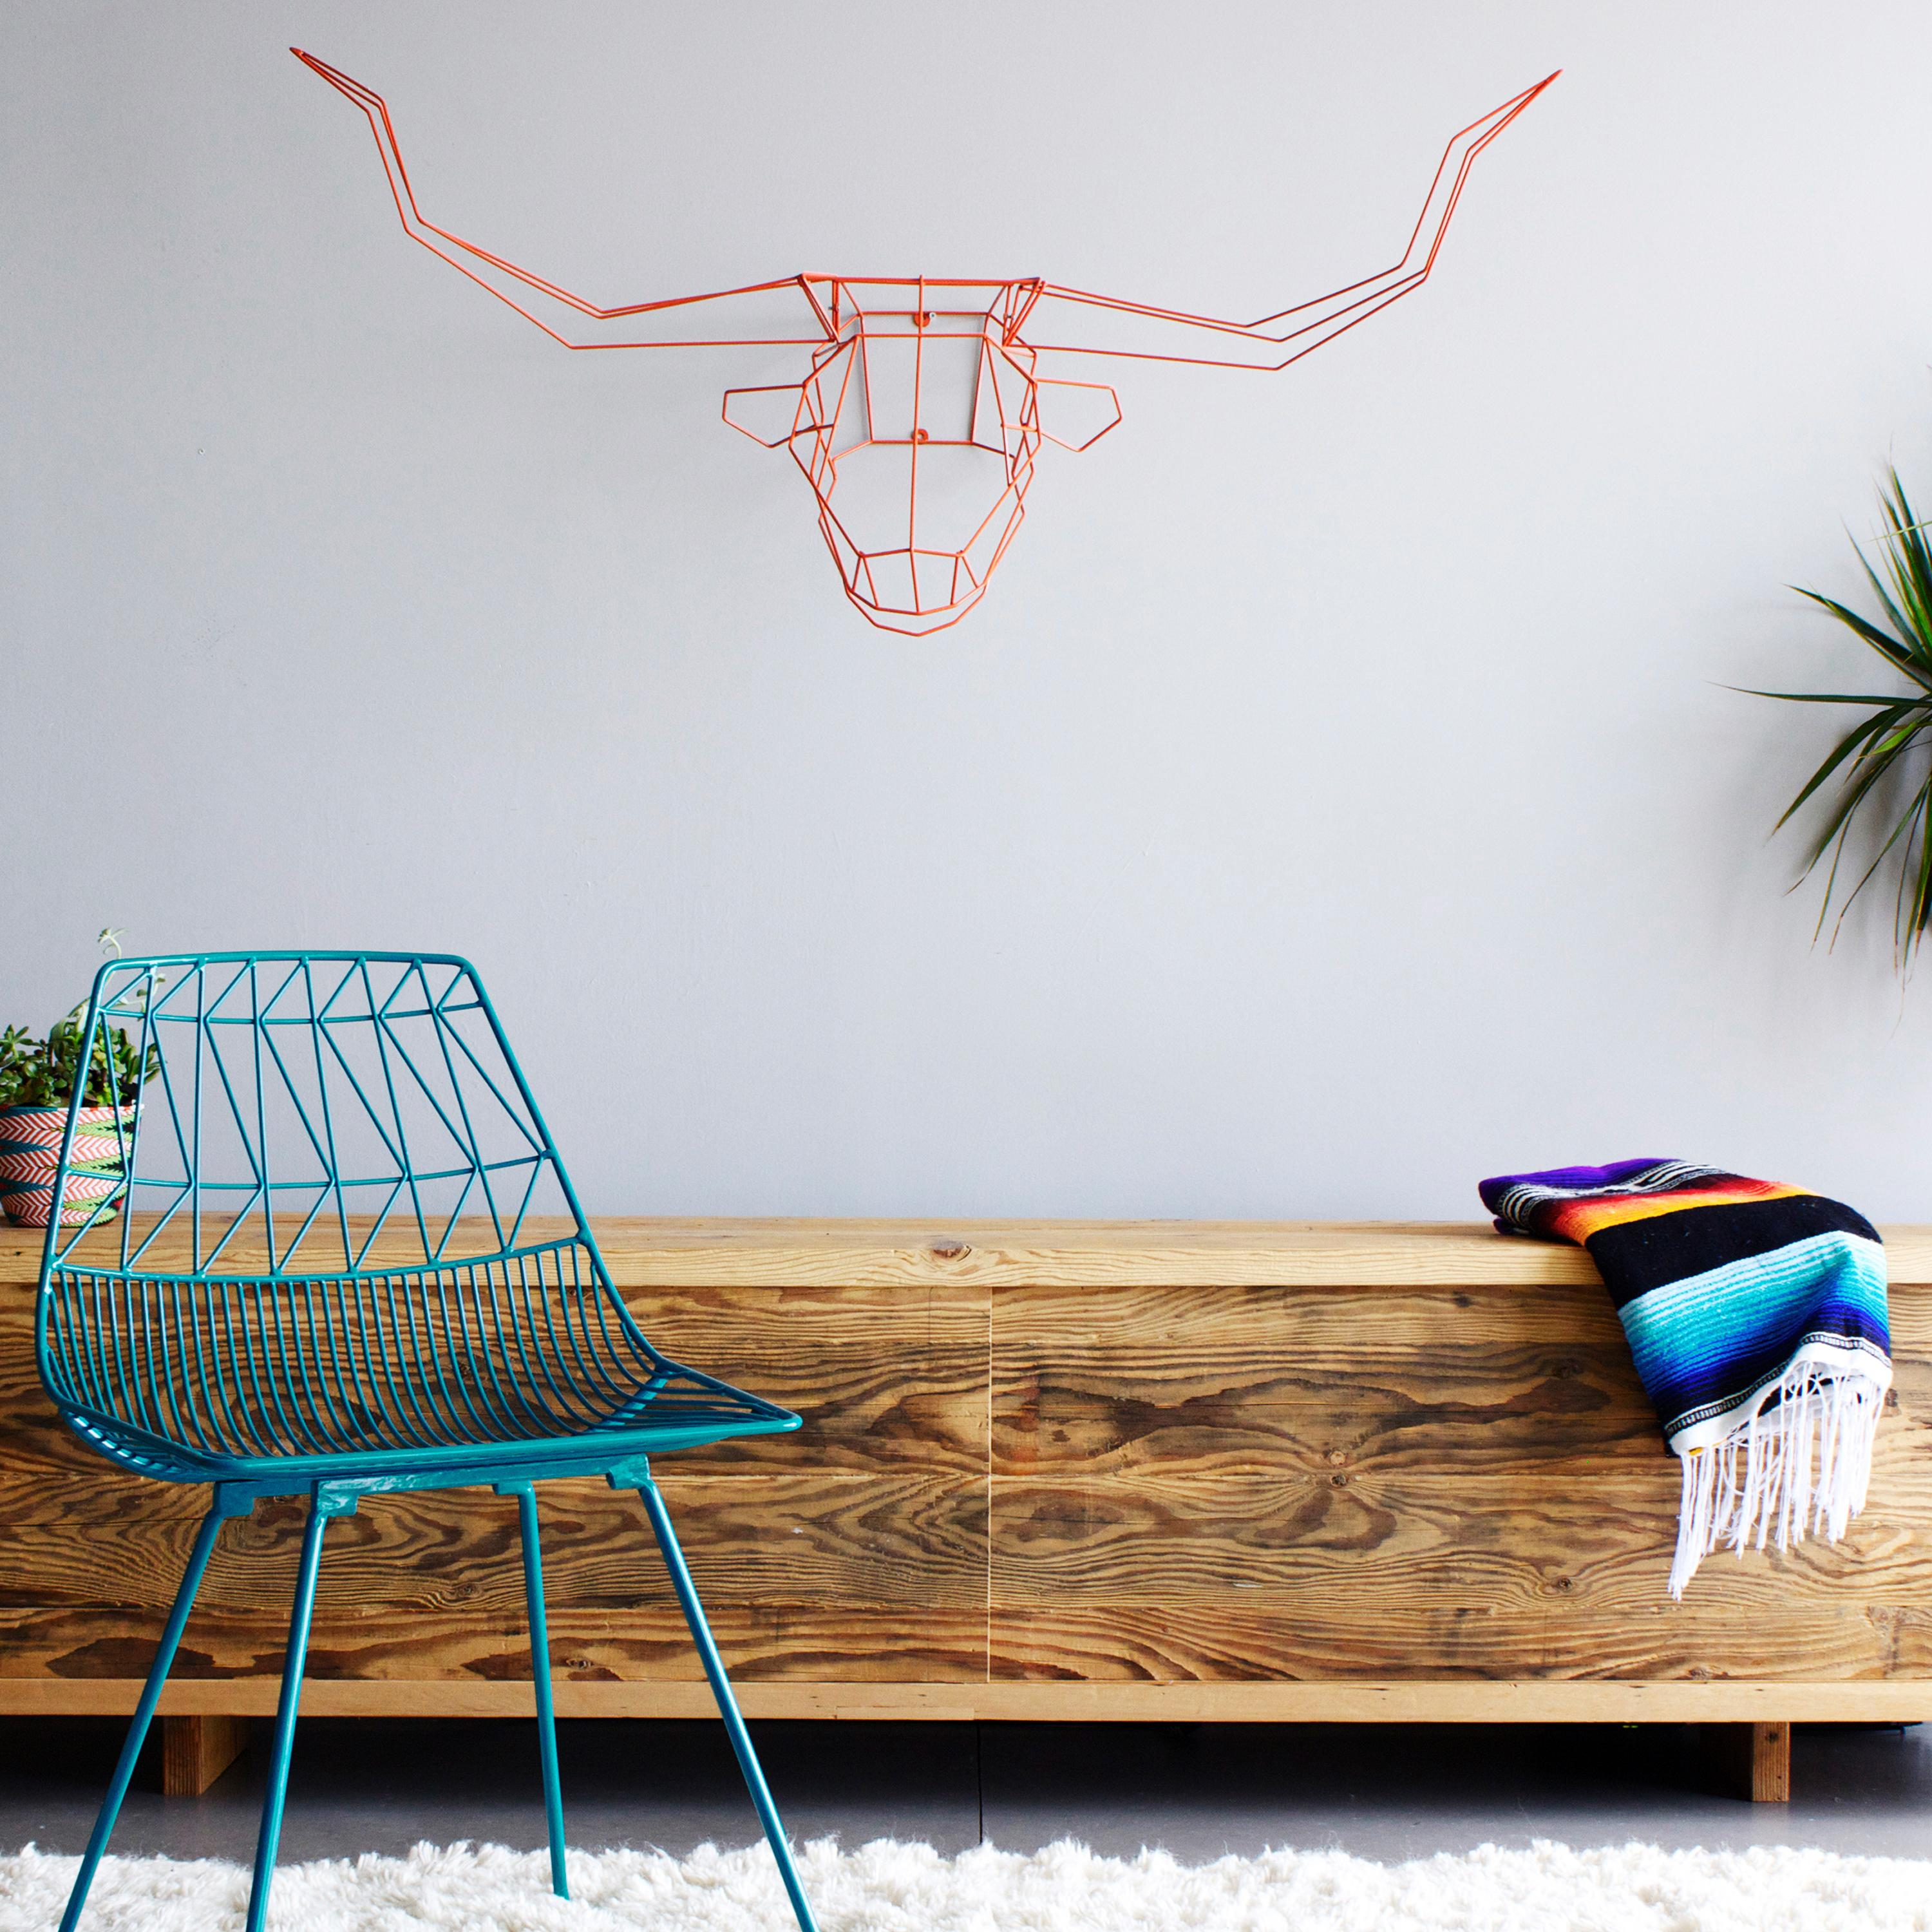 Unknown Animal Sculpture, Wall Art, the Long Horn by Bend Goods, Orange